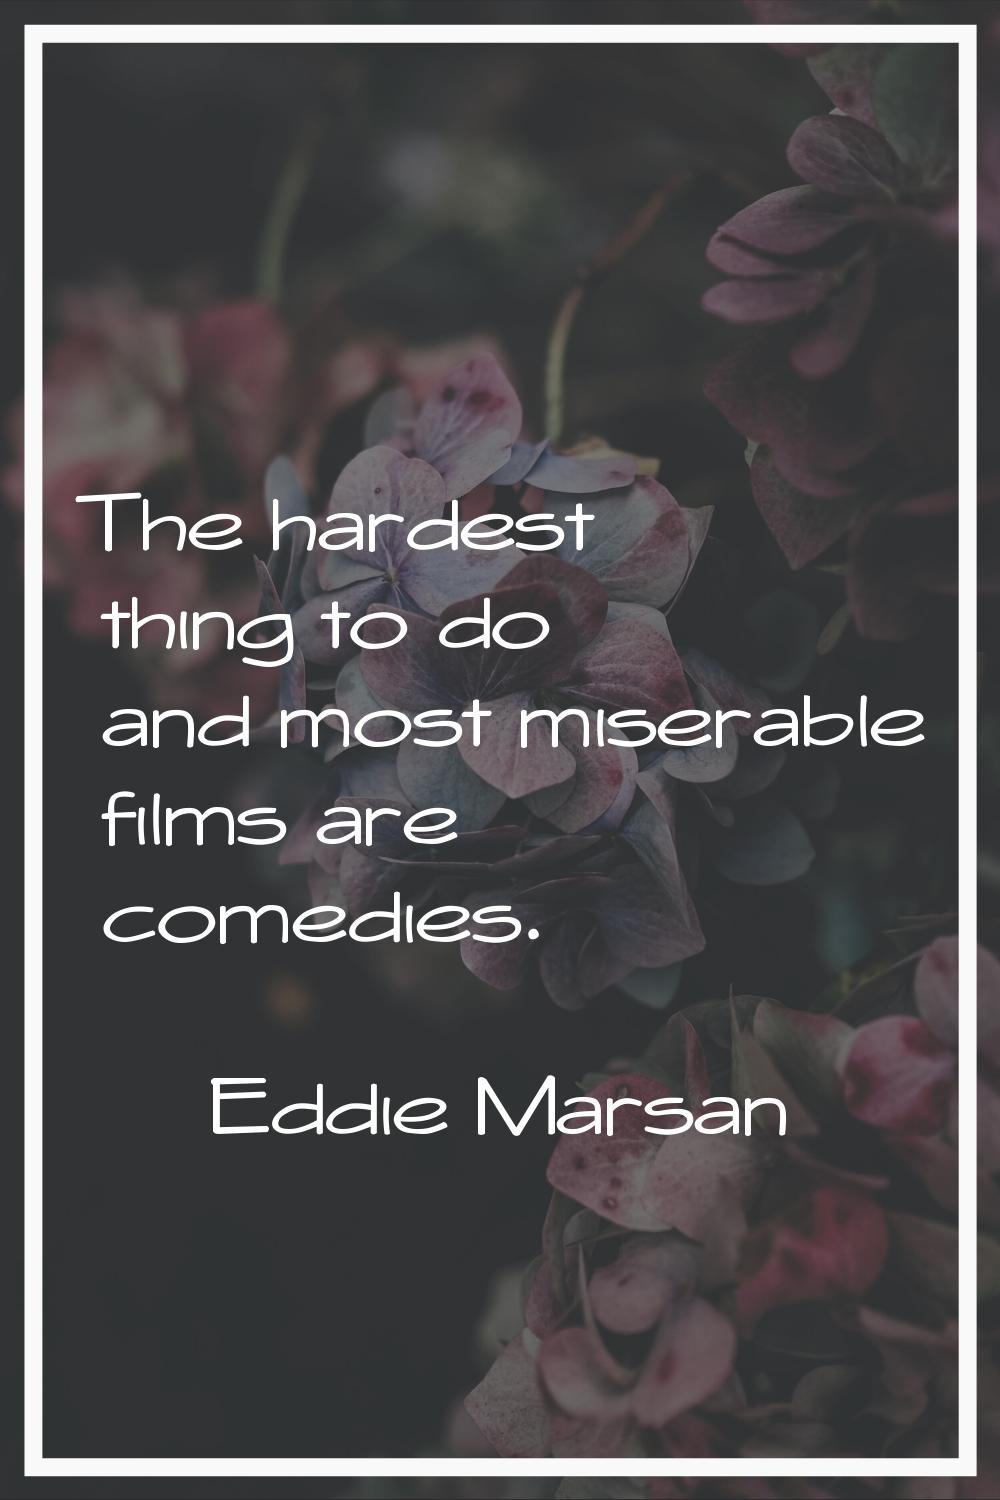 The hardest thing to do and most miserable films are comedies.